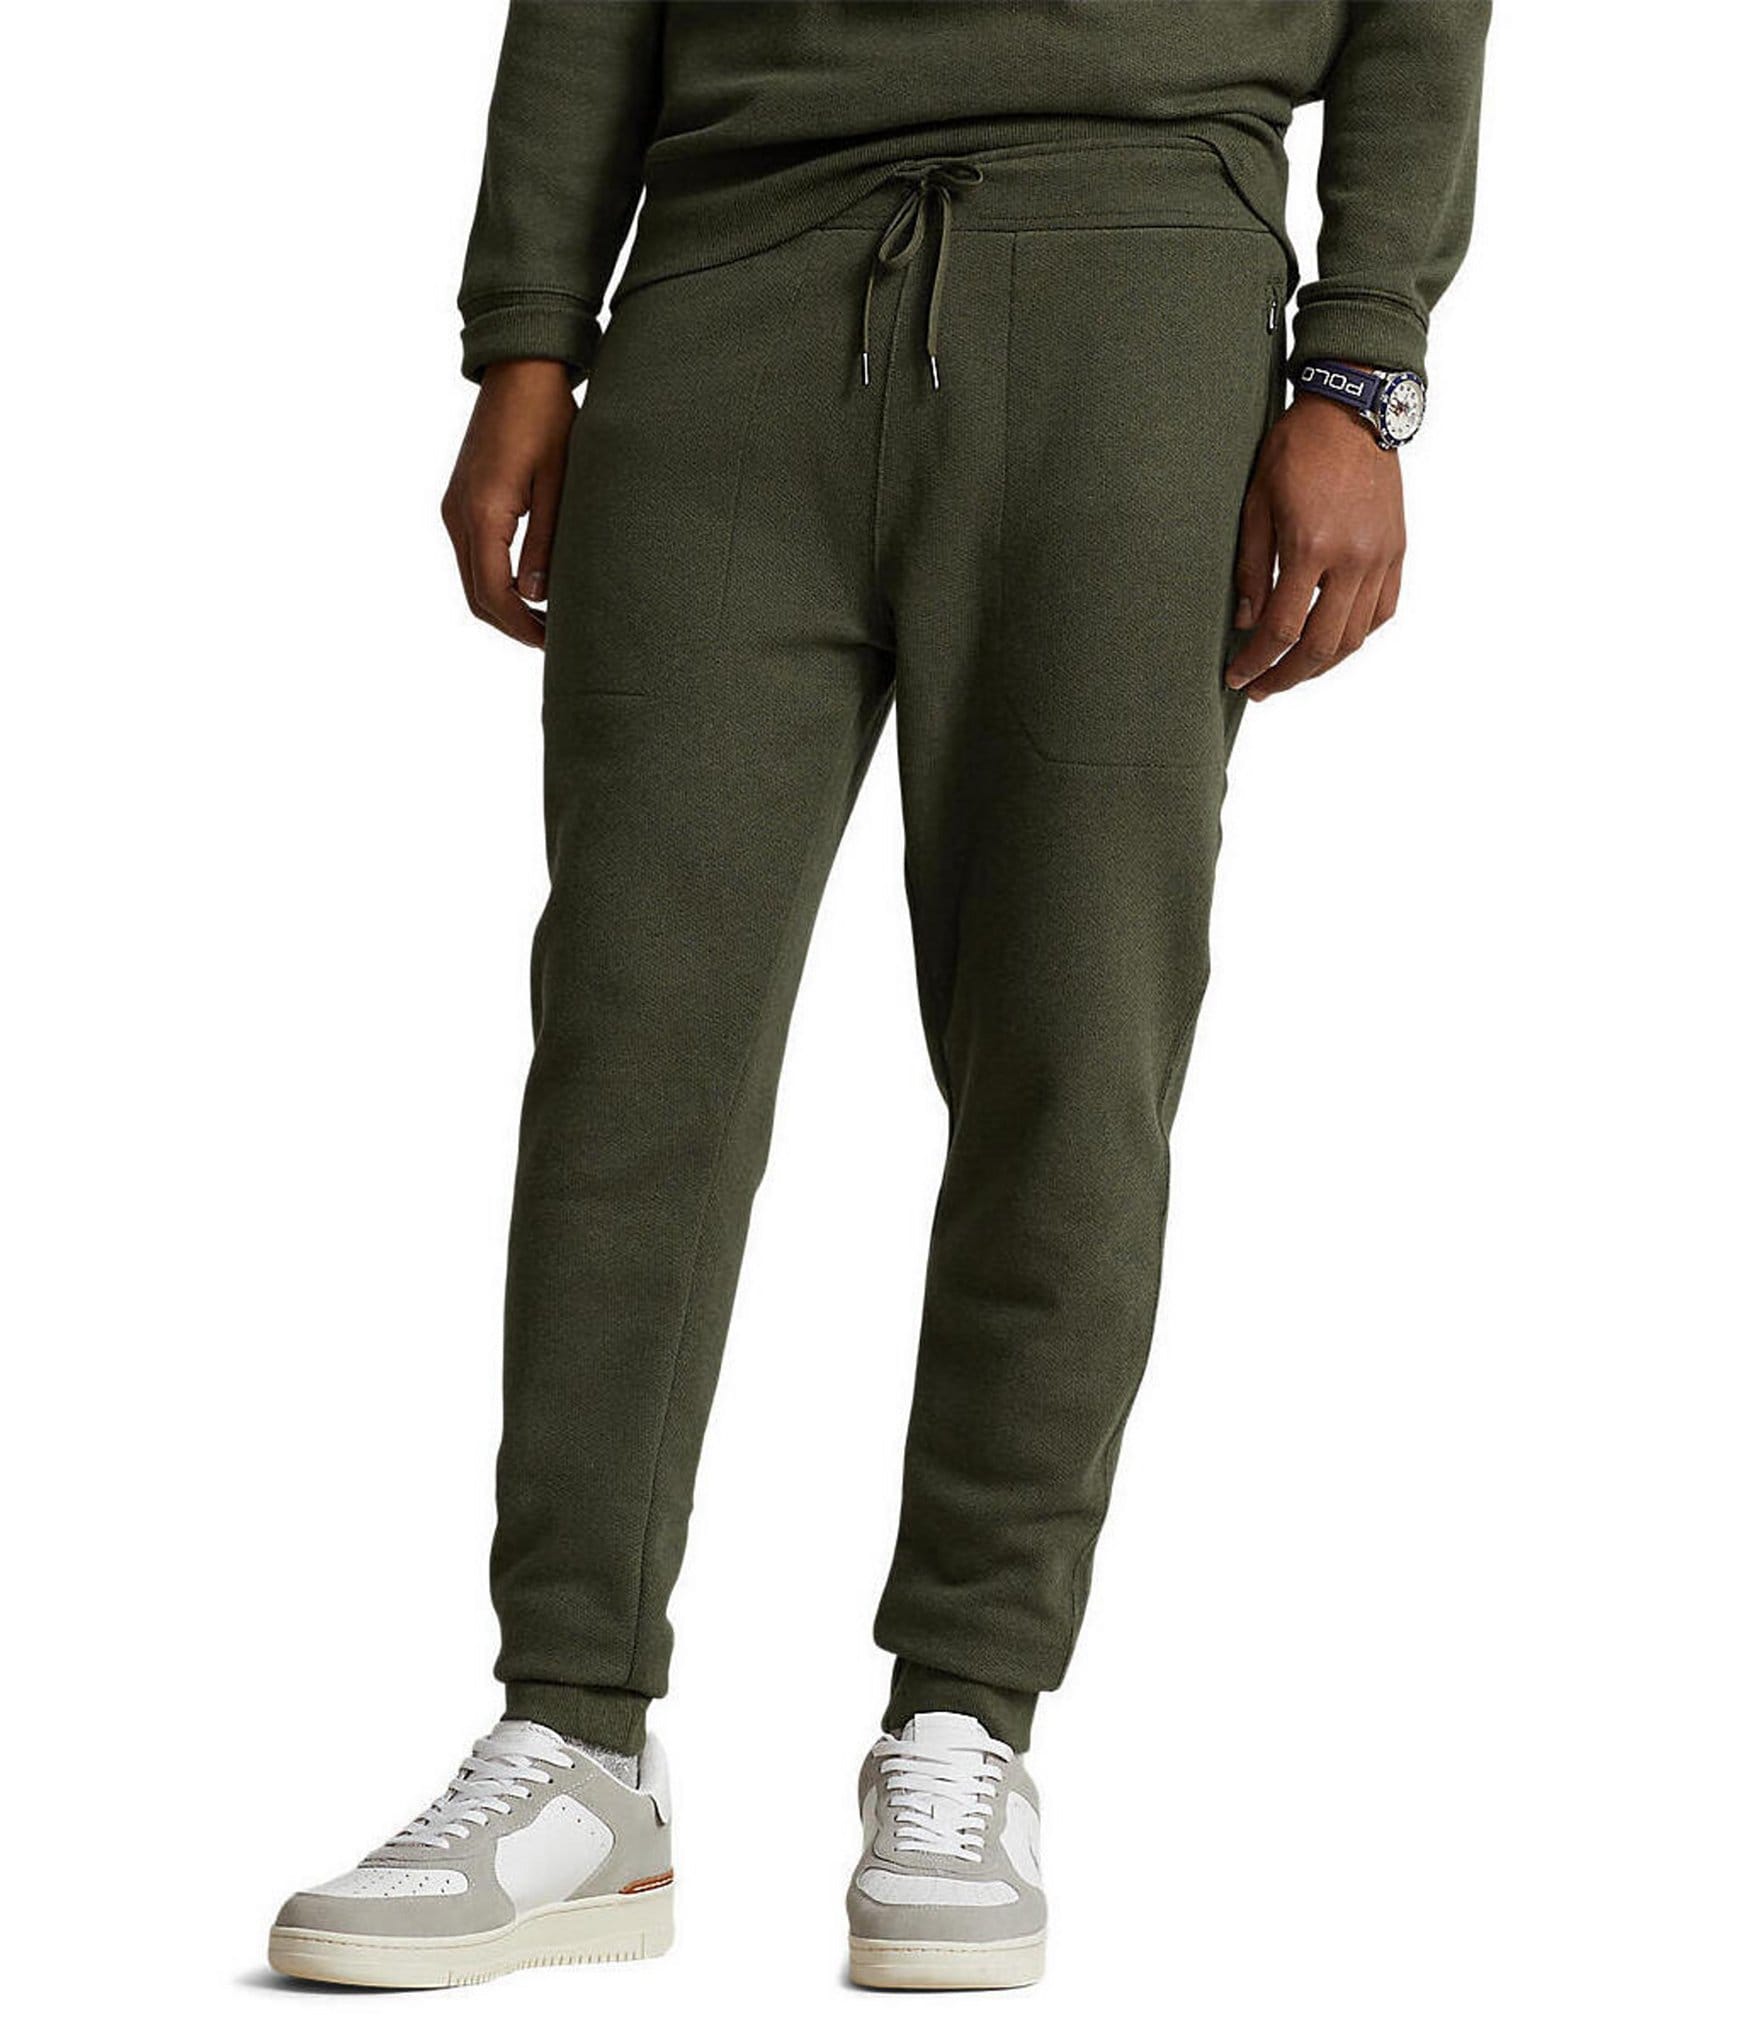 Polo Ralph Lauren Relaxed Fit Twill Hiking-Inspired Flat Front